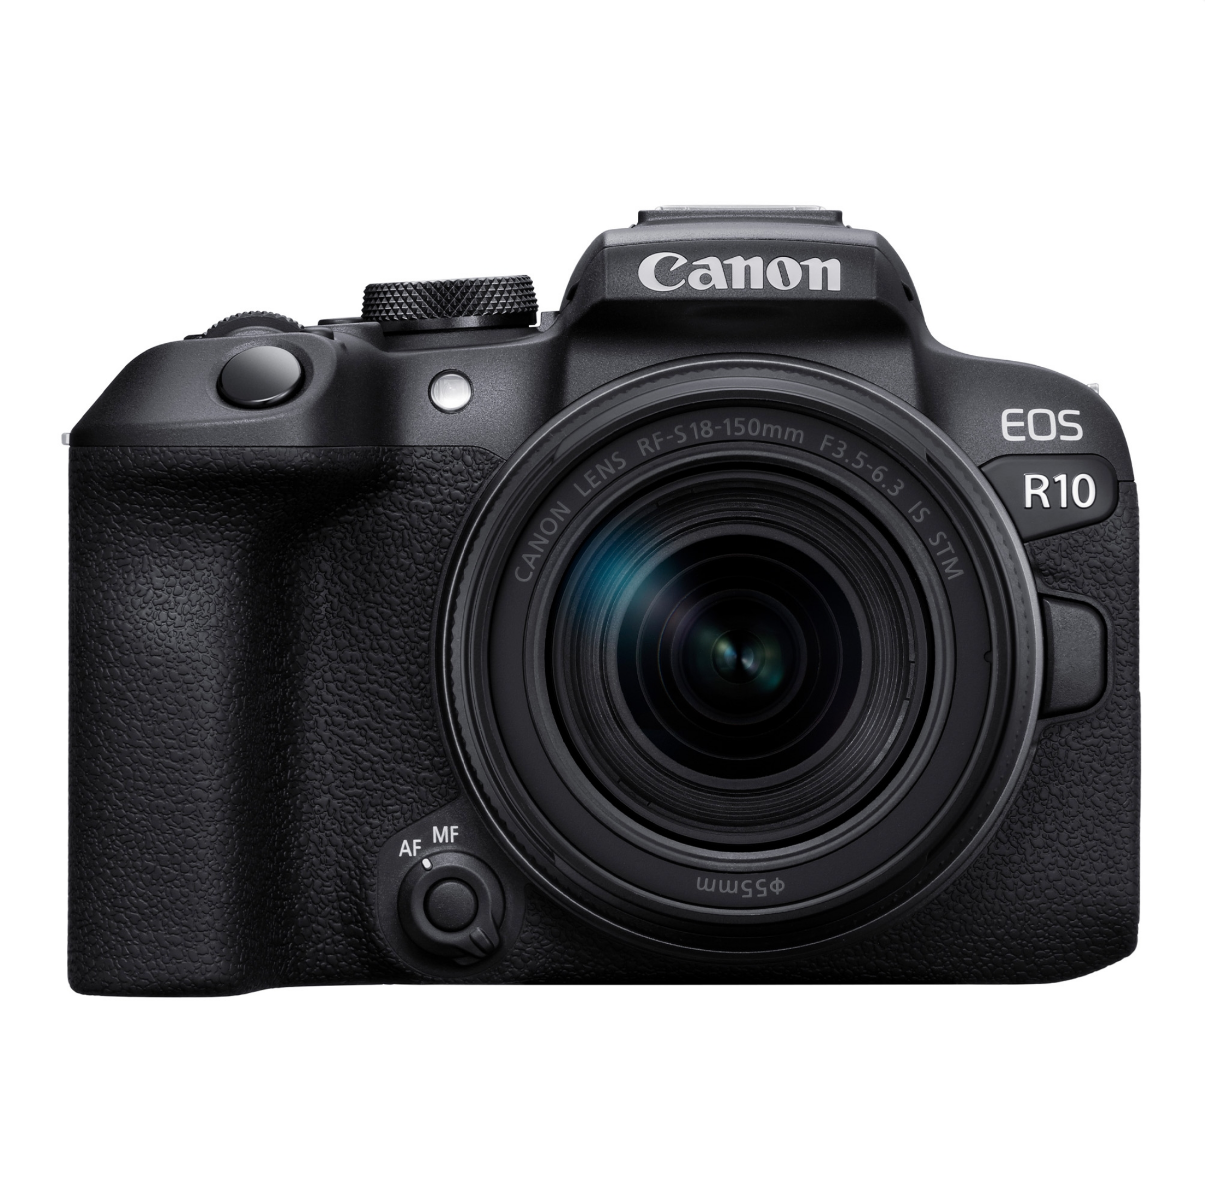 Canon EOS R10 Mirrorless Camera + RF-S 18-150mm F3.5-6.3 IS STM Lens Kit - Product Photo 3 - Front view of the camera with the lens attached